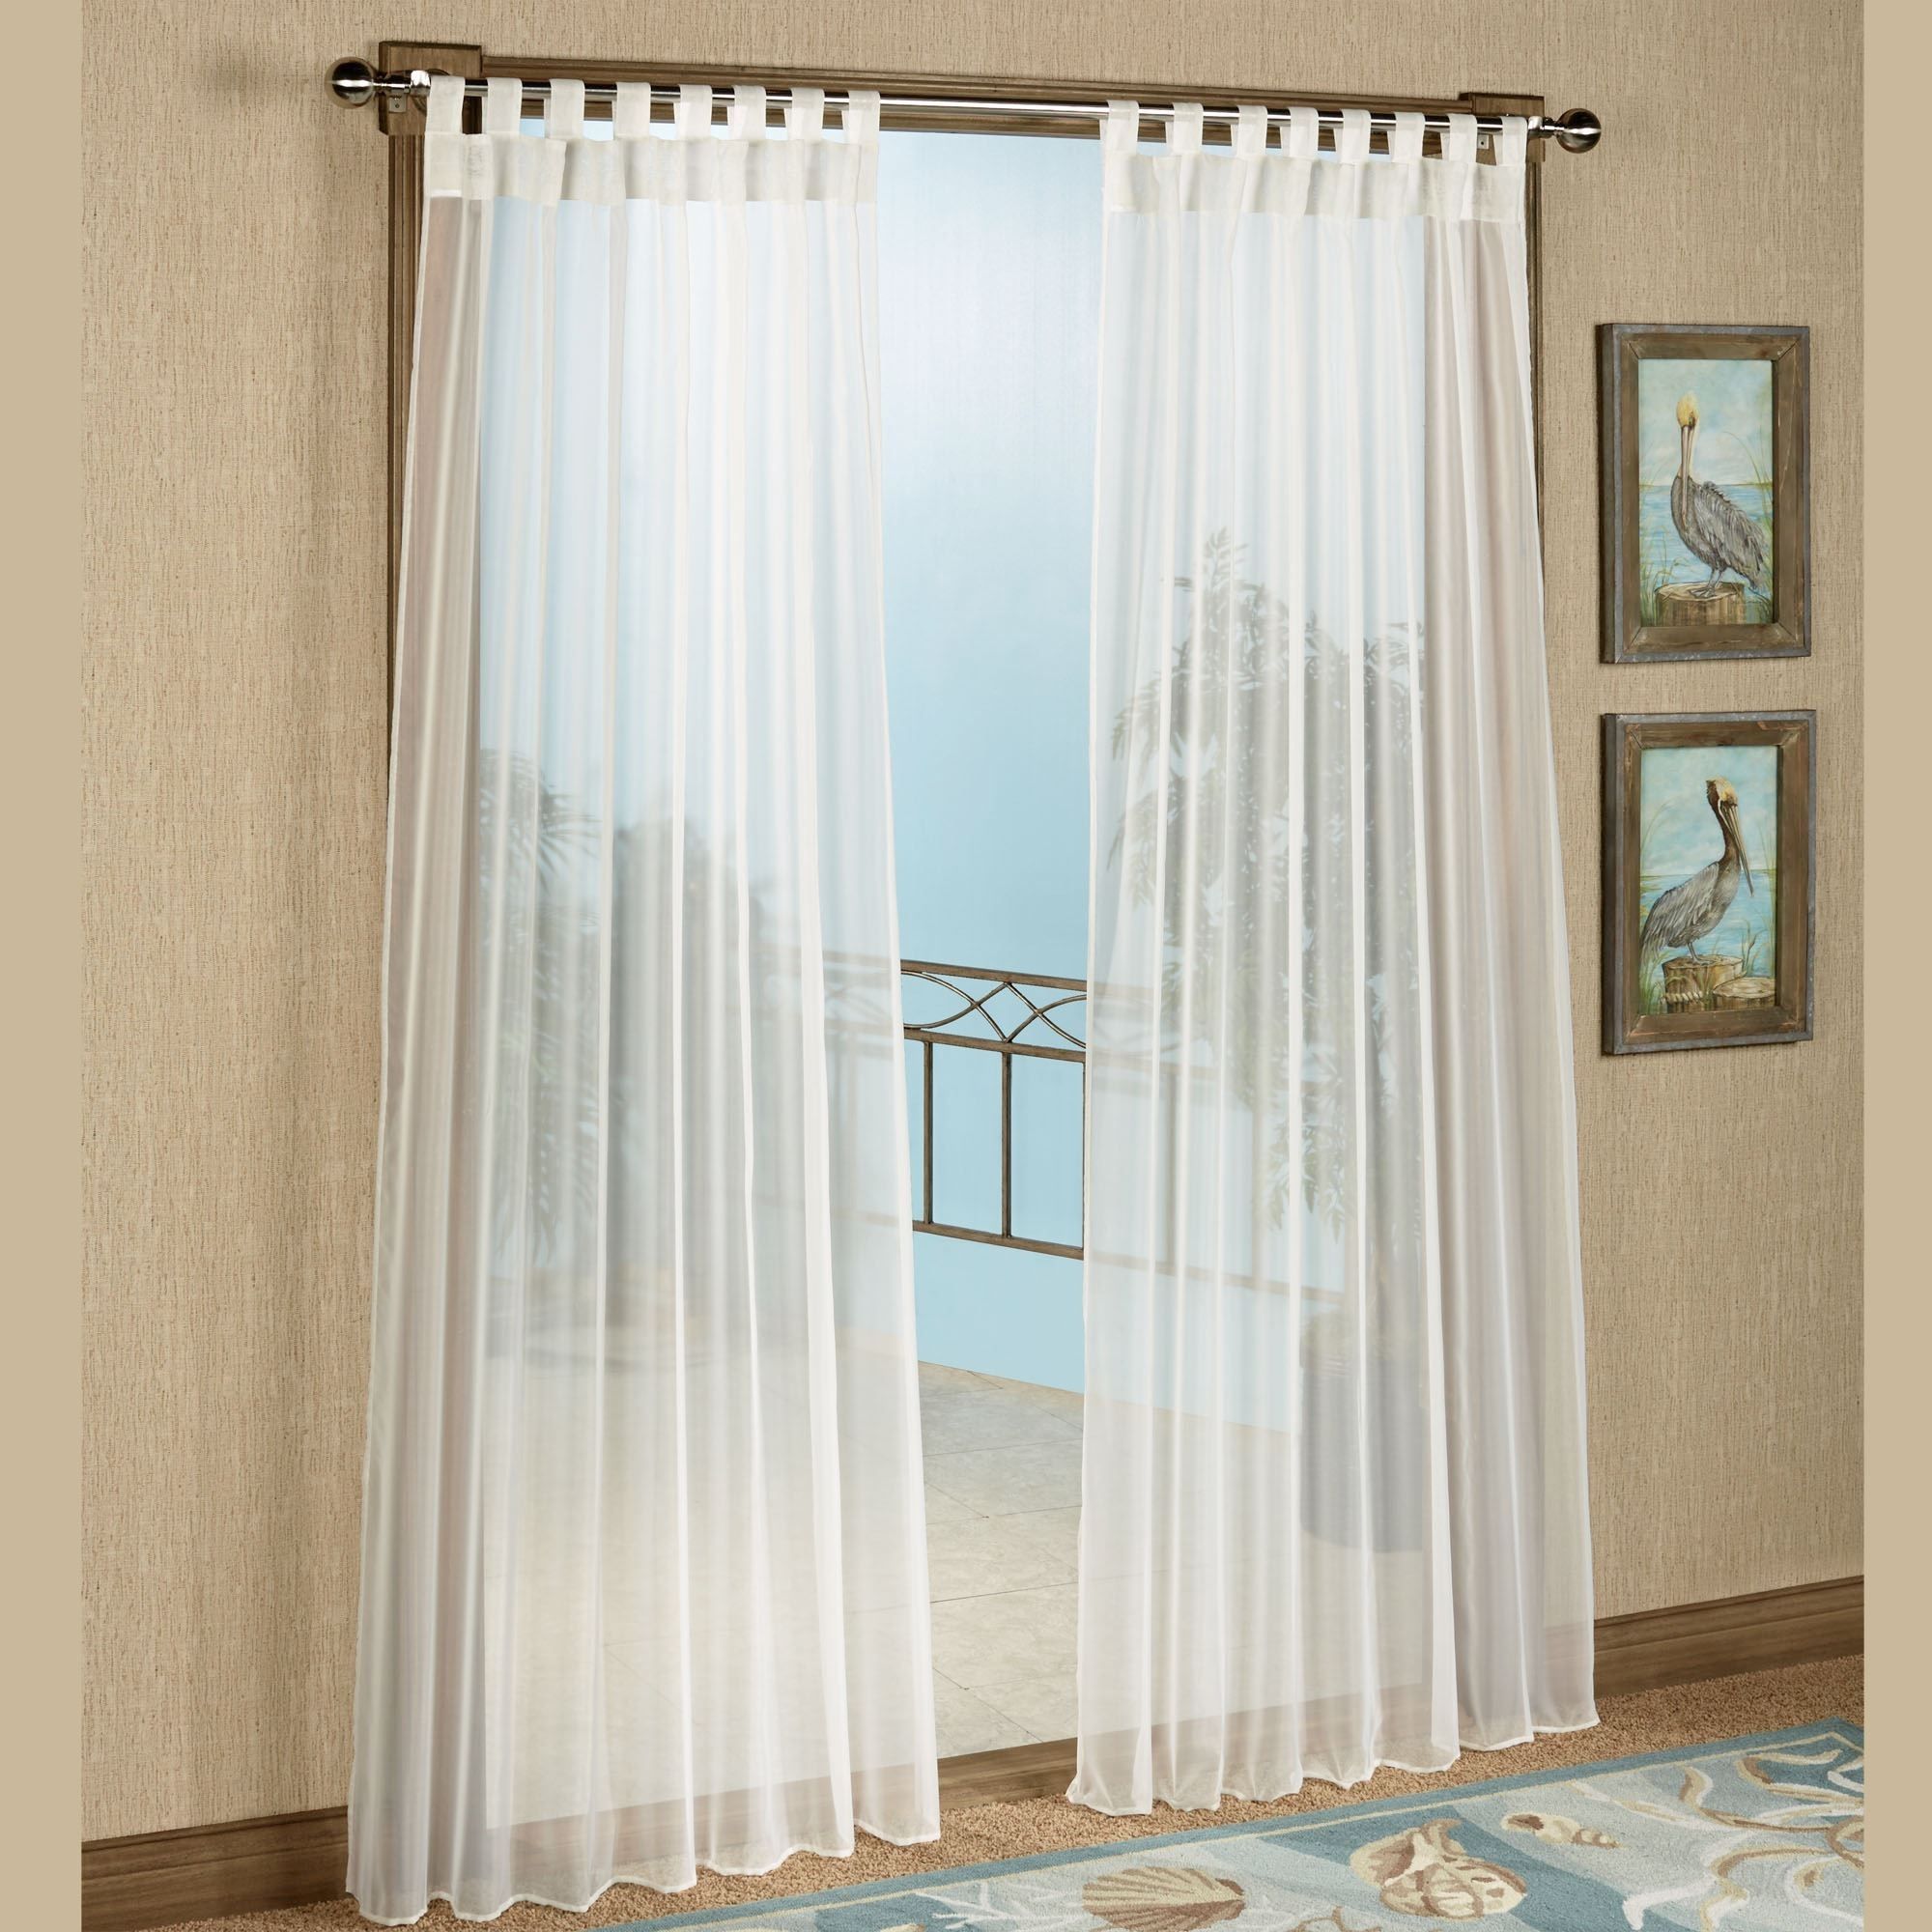 Unique Curtains Fresh Idea To Design Your Outdoor Curtain Rods Pertaining To Extra Long Outdoor Curtain Rods (View 22 of 25)